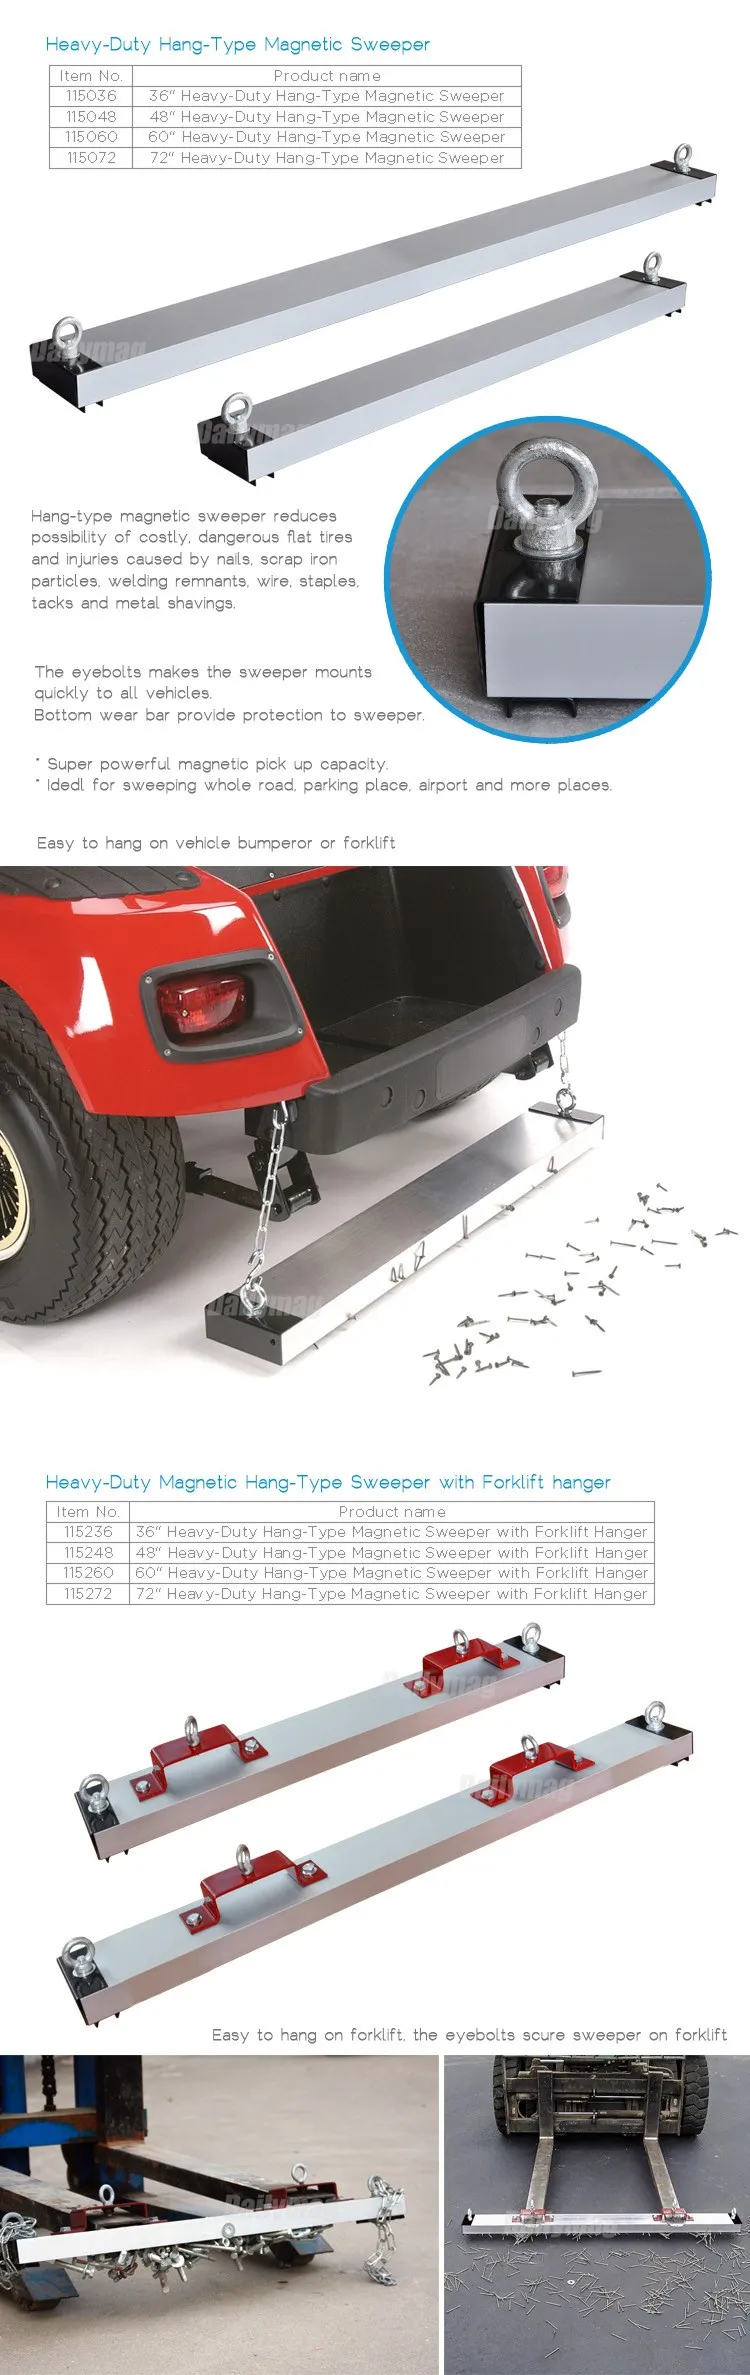 Magnetic Sweeper Hang Type For Forklift Truck 48 Sweeping Width And Quick Release 1 Each Buy Magnetic Sweeper Untuk Forklift Magnetic Sweeper Untuk Truk Magnetic Sweeper Hang Tipe Product On Alibaba Com